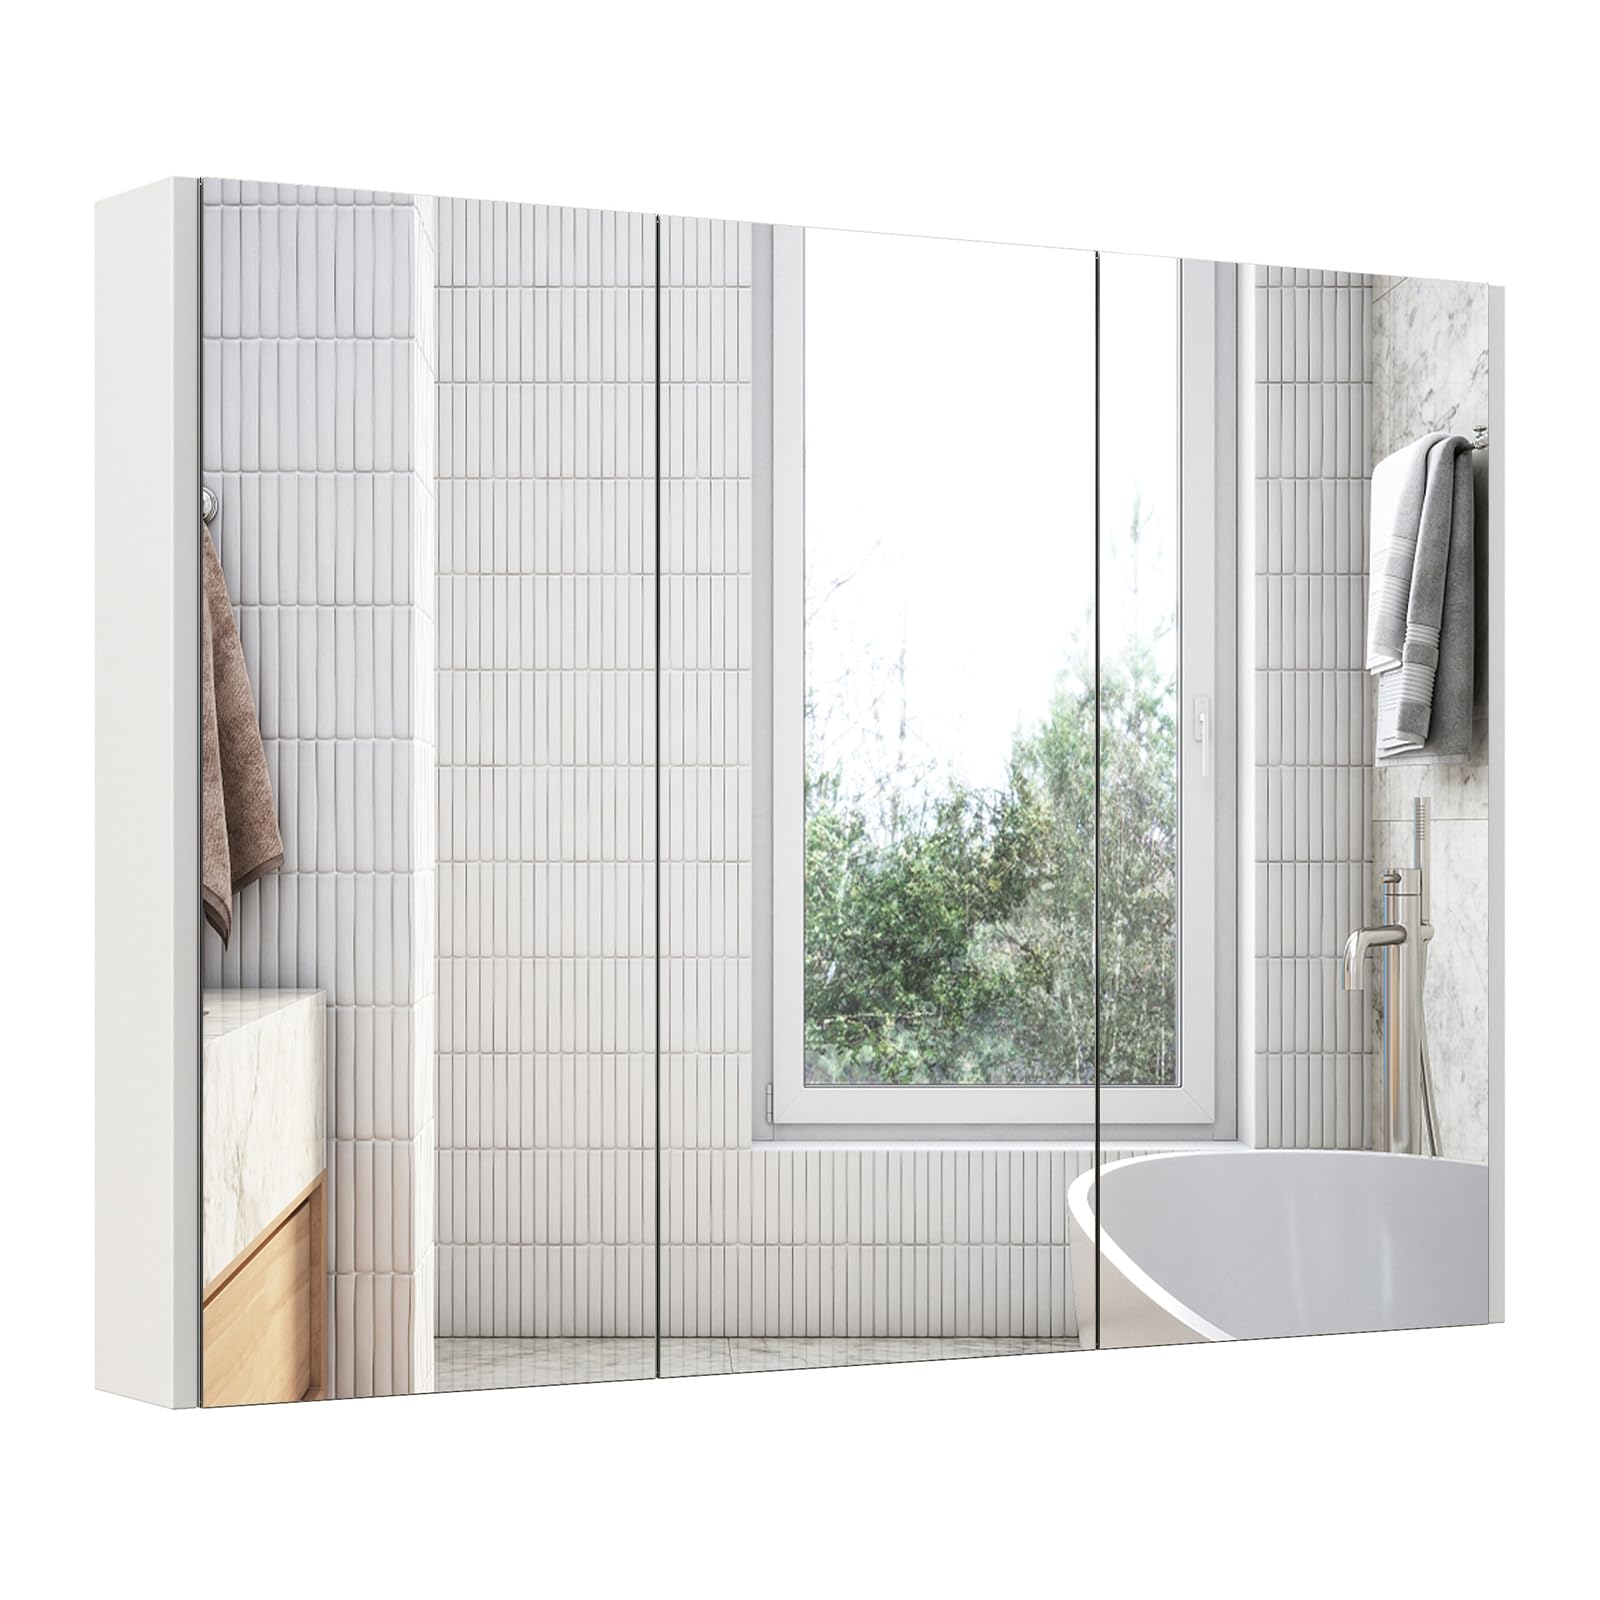 Giantex Bathroom Medicine Cabinet with Mirror - Extra Large Wall Mounted Cabinet with 3 Frameless Mirrored Doors